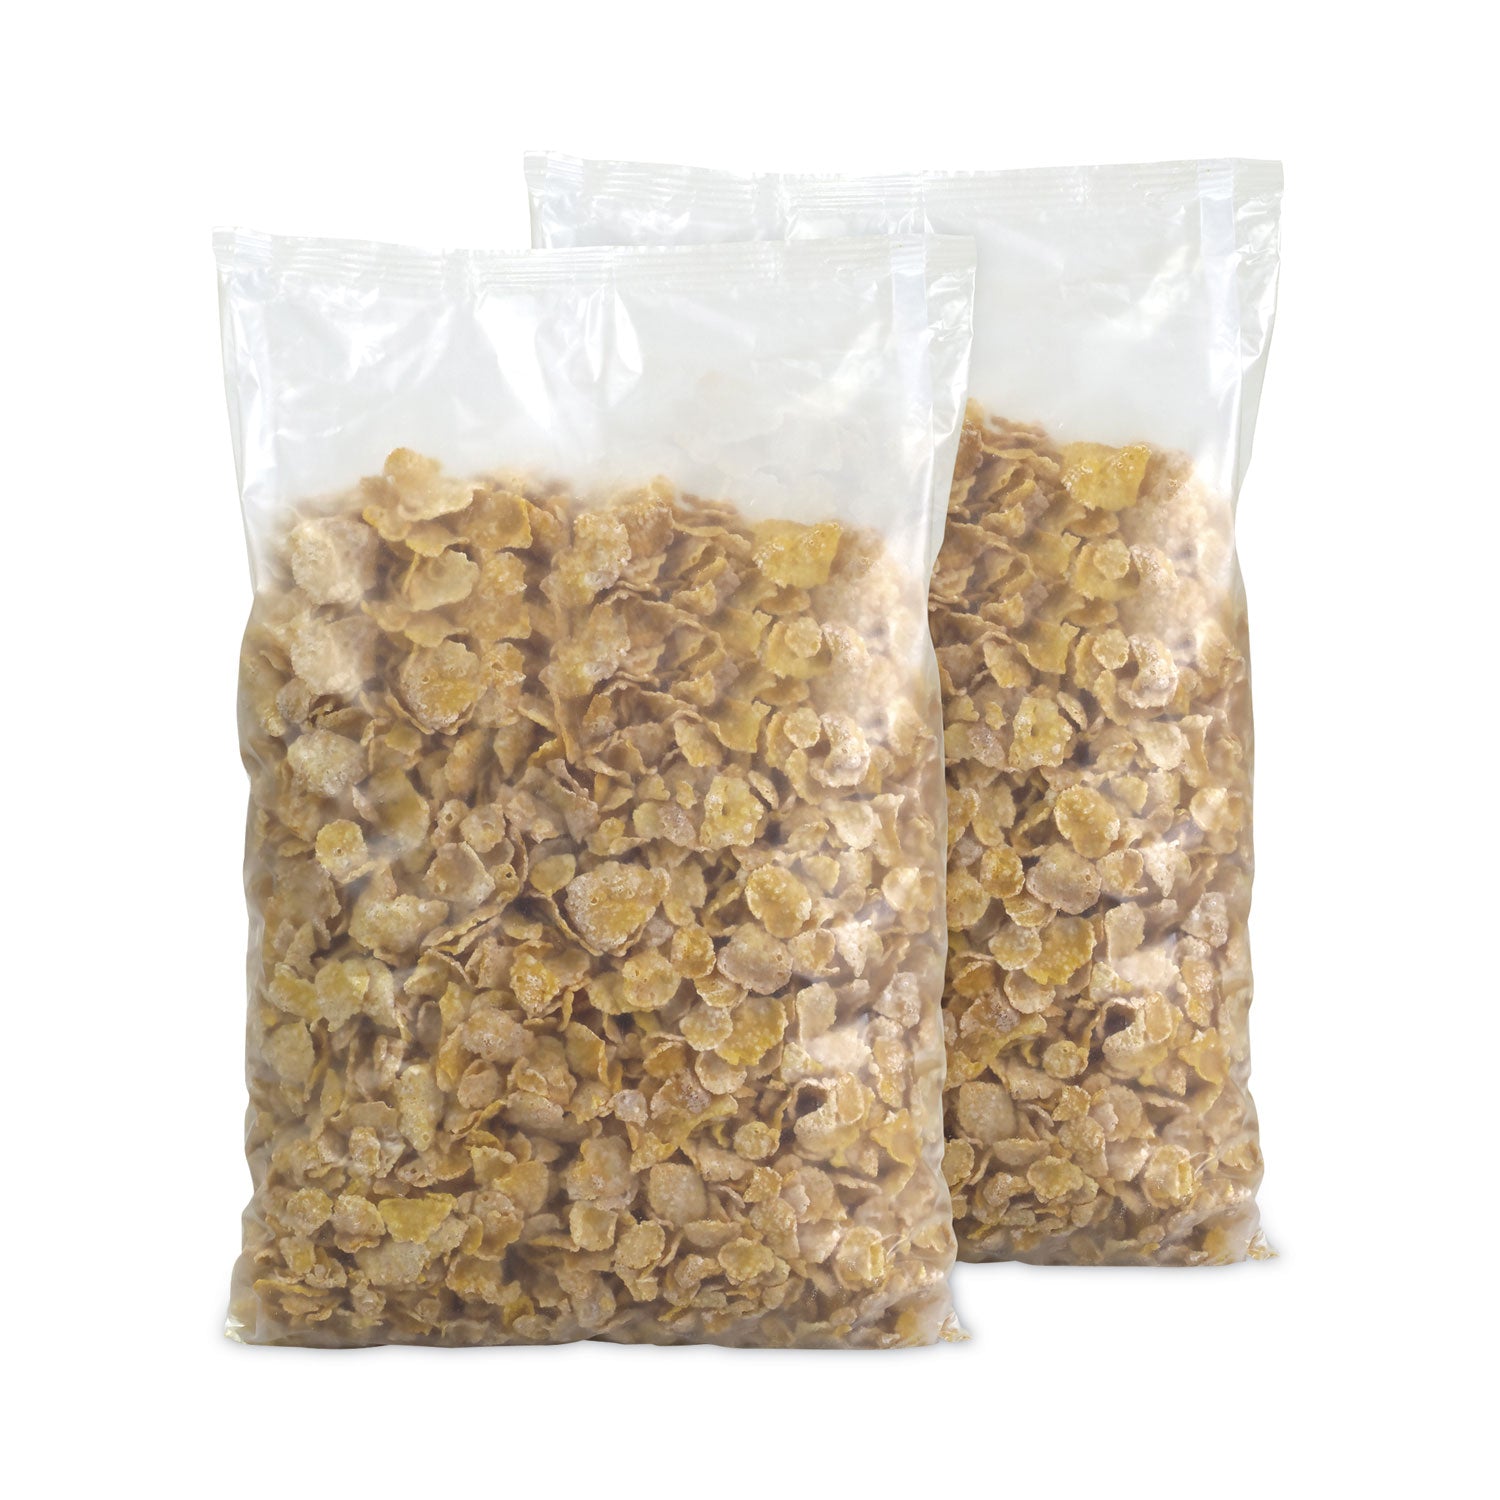 frosted-flakes-breakfast-cereal-619-oz-bag-2-bags-box-ships-in-1-3-business-days_grr22000901 - 2